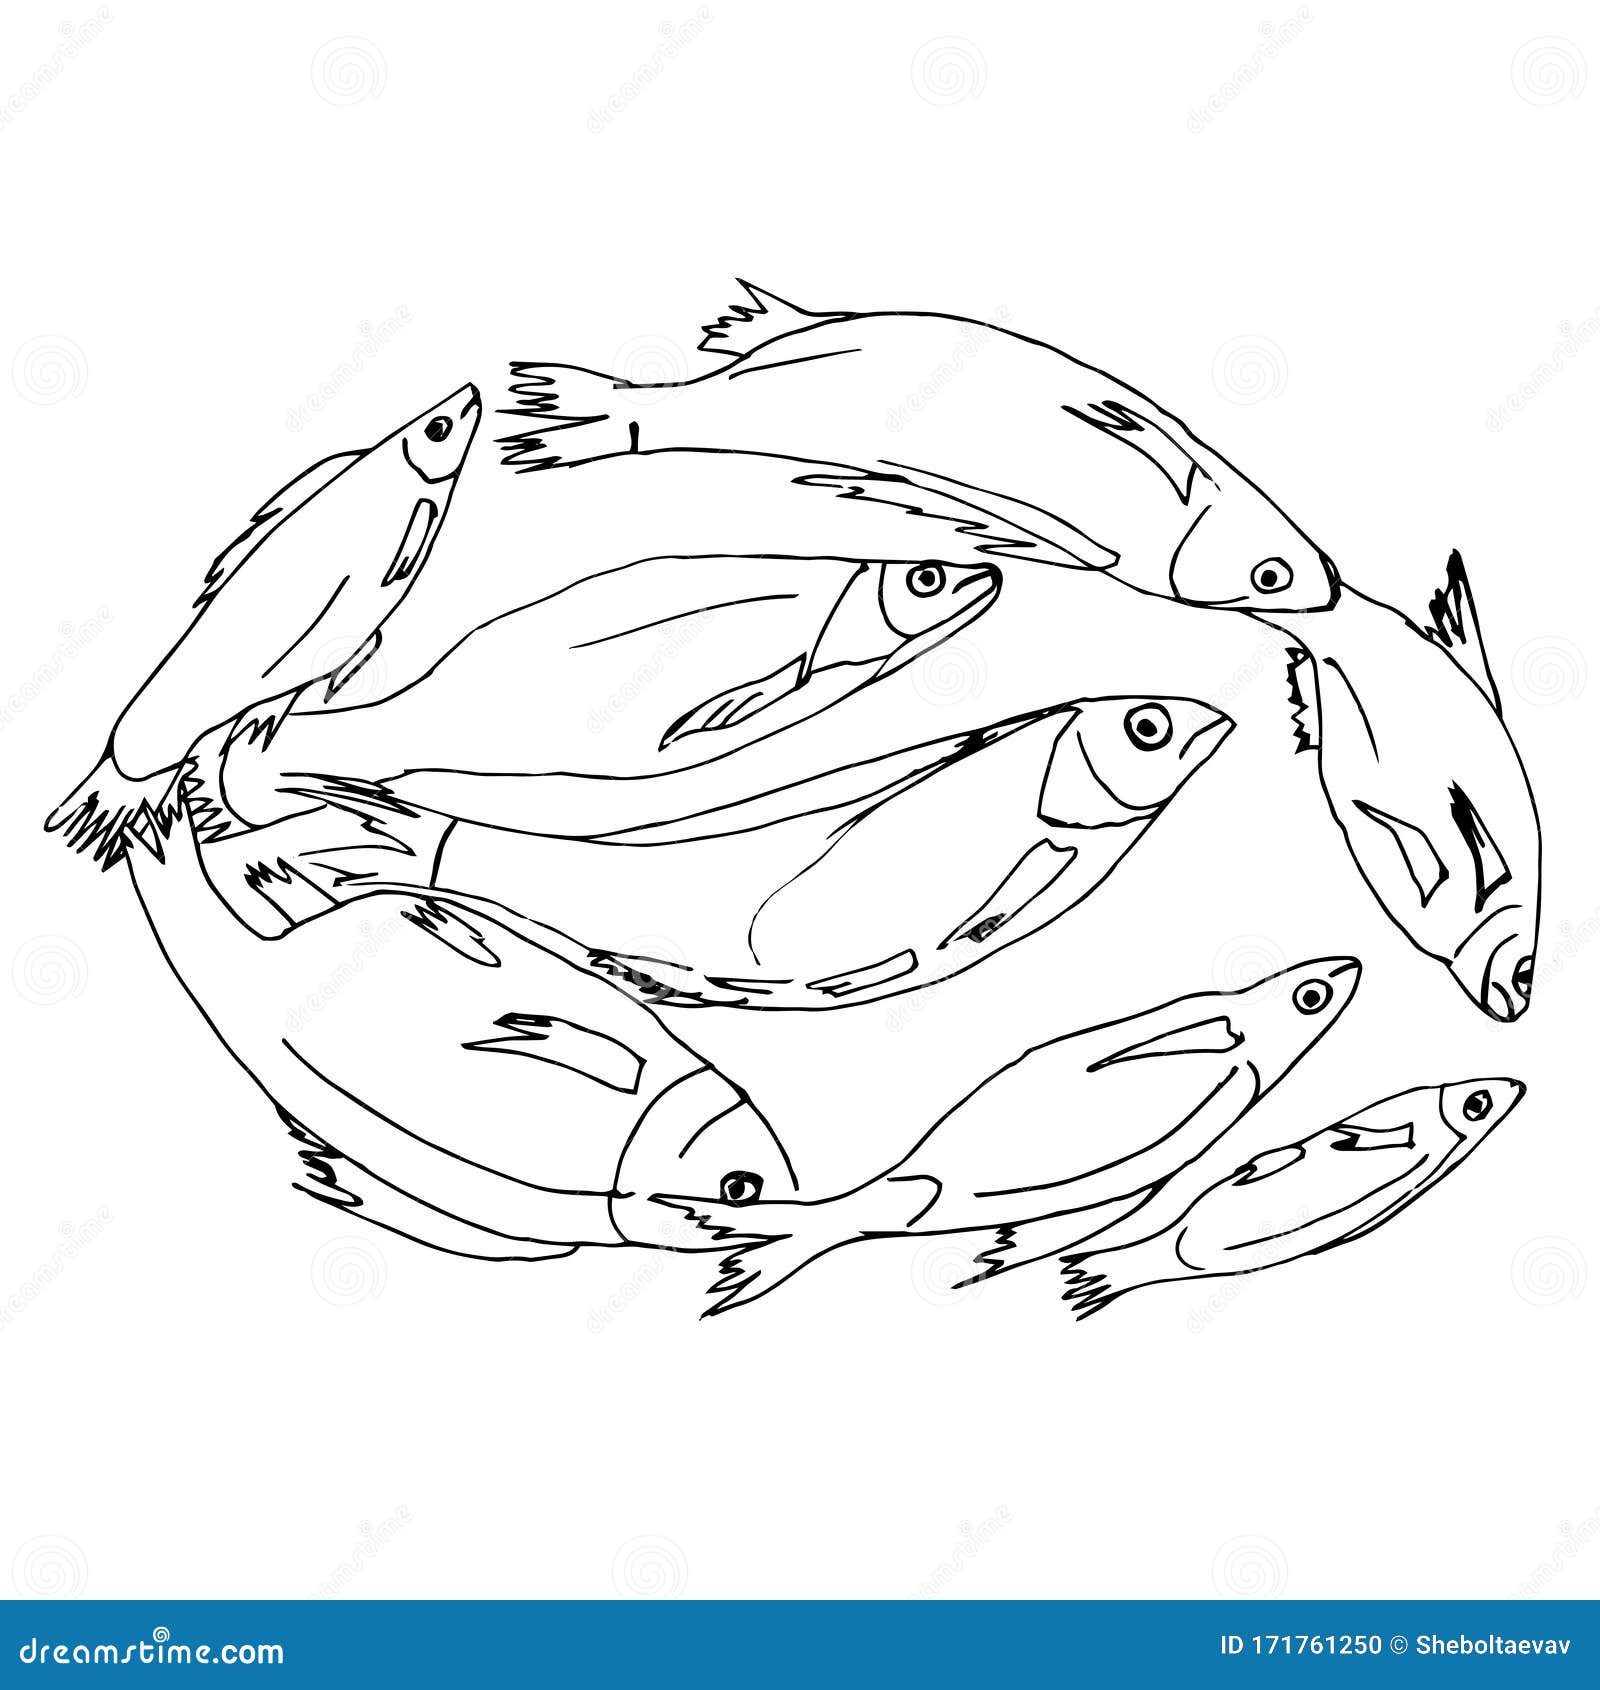 A Quick Sketch of a River Fish Lying in a Circle. Fisherman`s